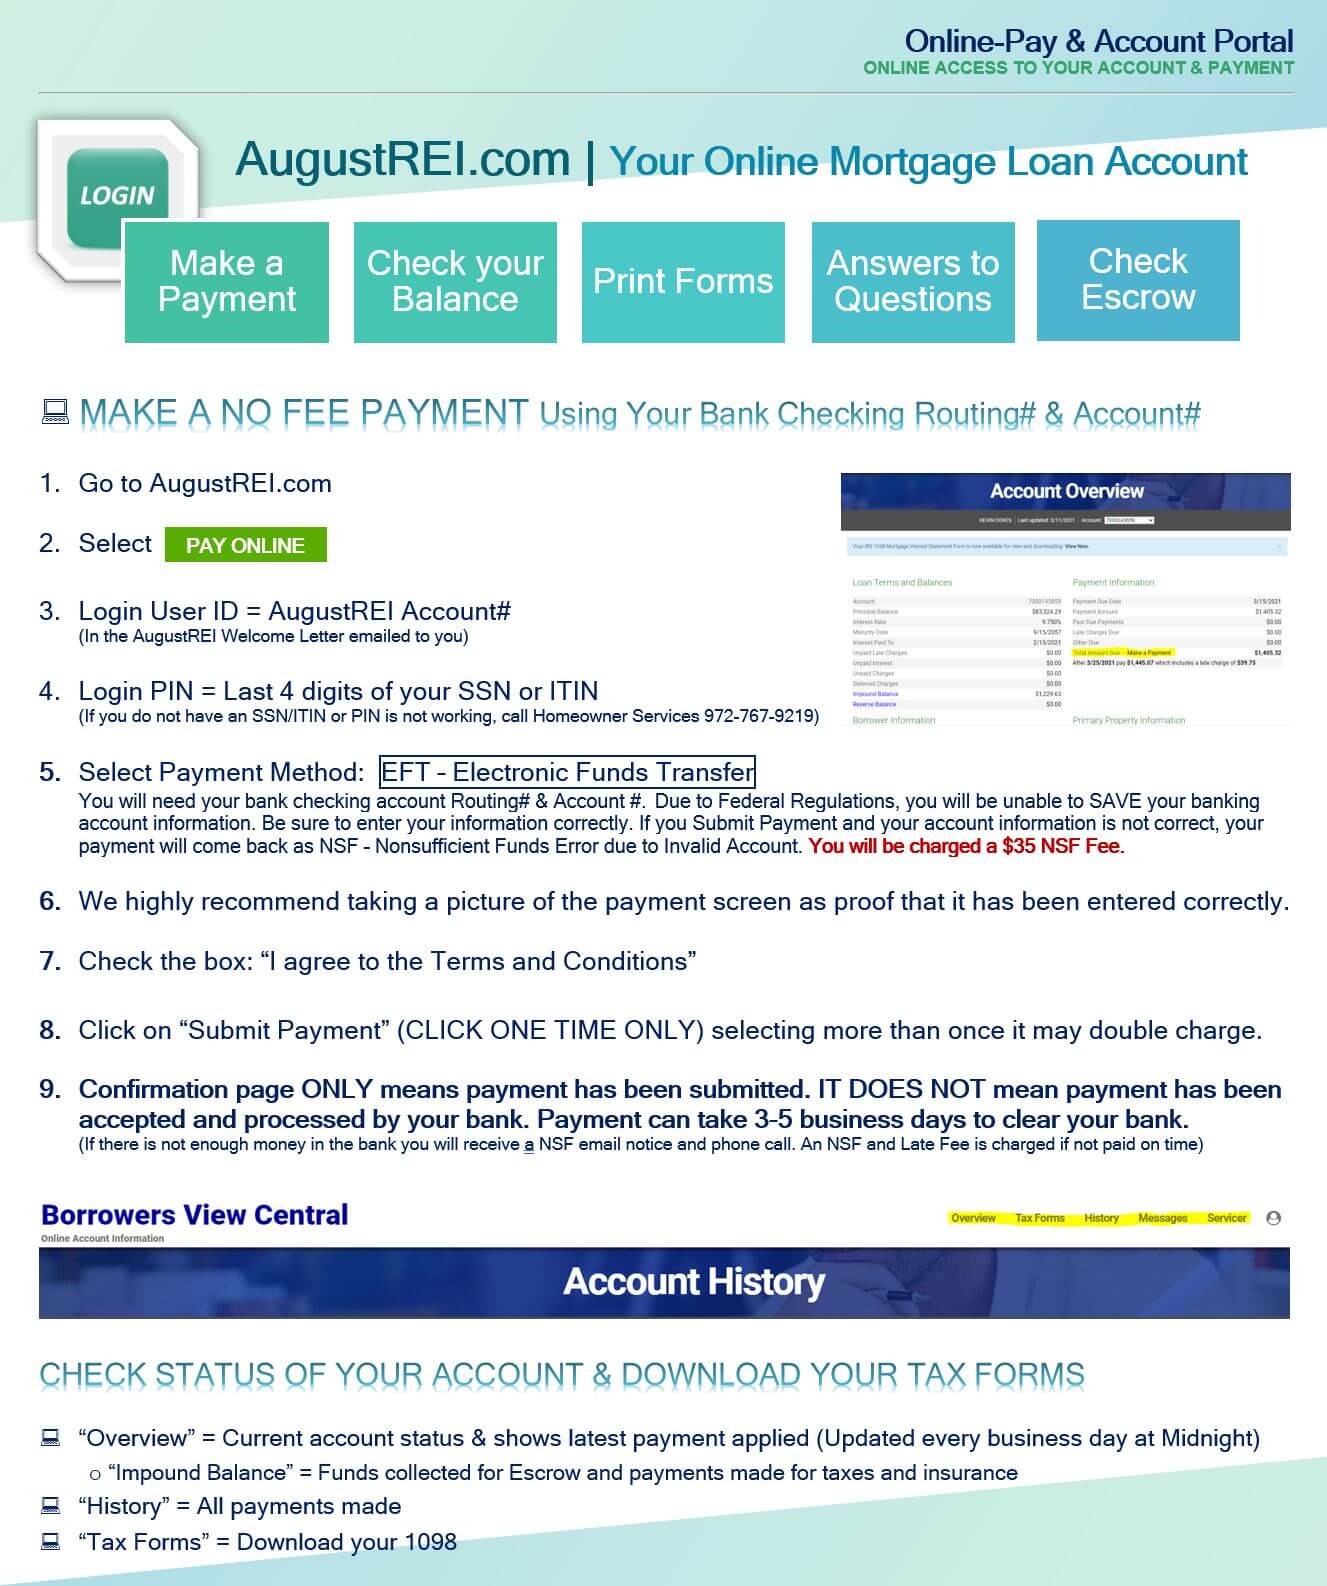 Online-Pay & Account Portal